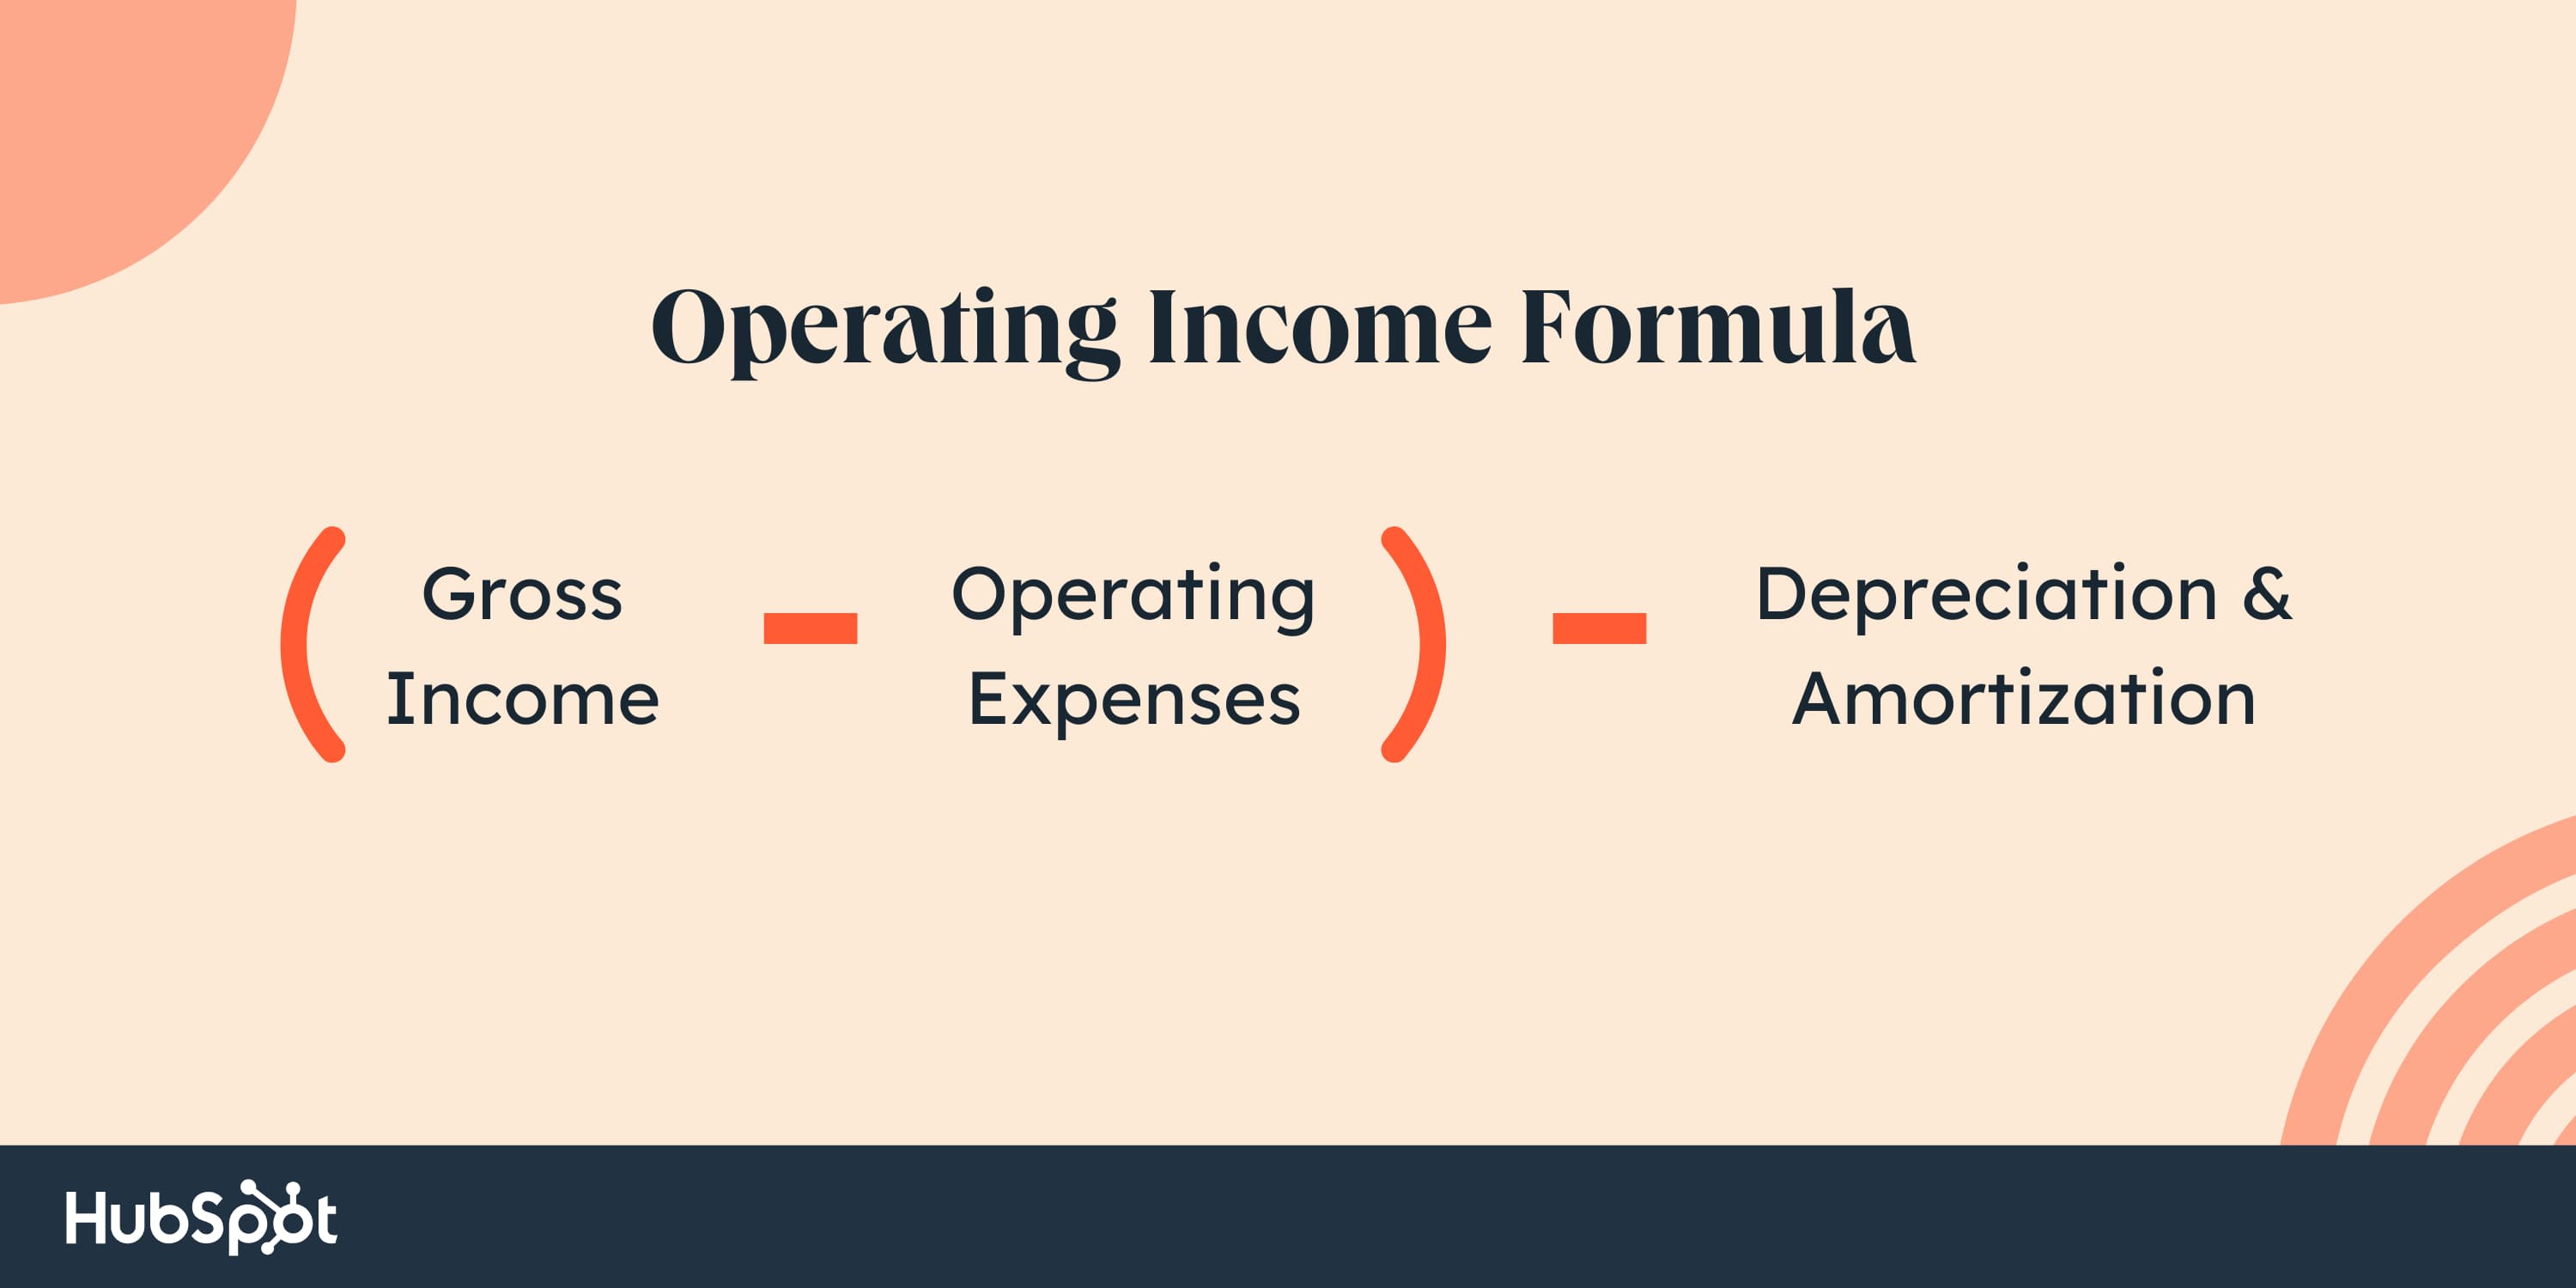 Operating Income Formula. Start with gross income. Subtract operating expenses. Subtract depreciation and amortization. The resulting number is operating income.